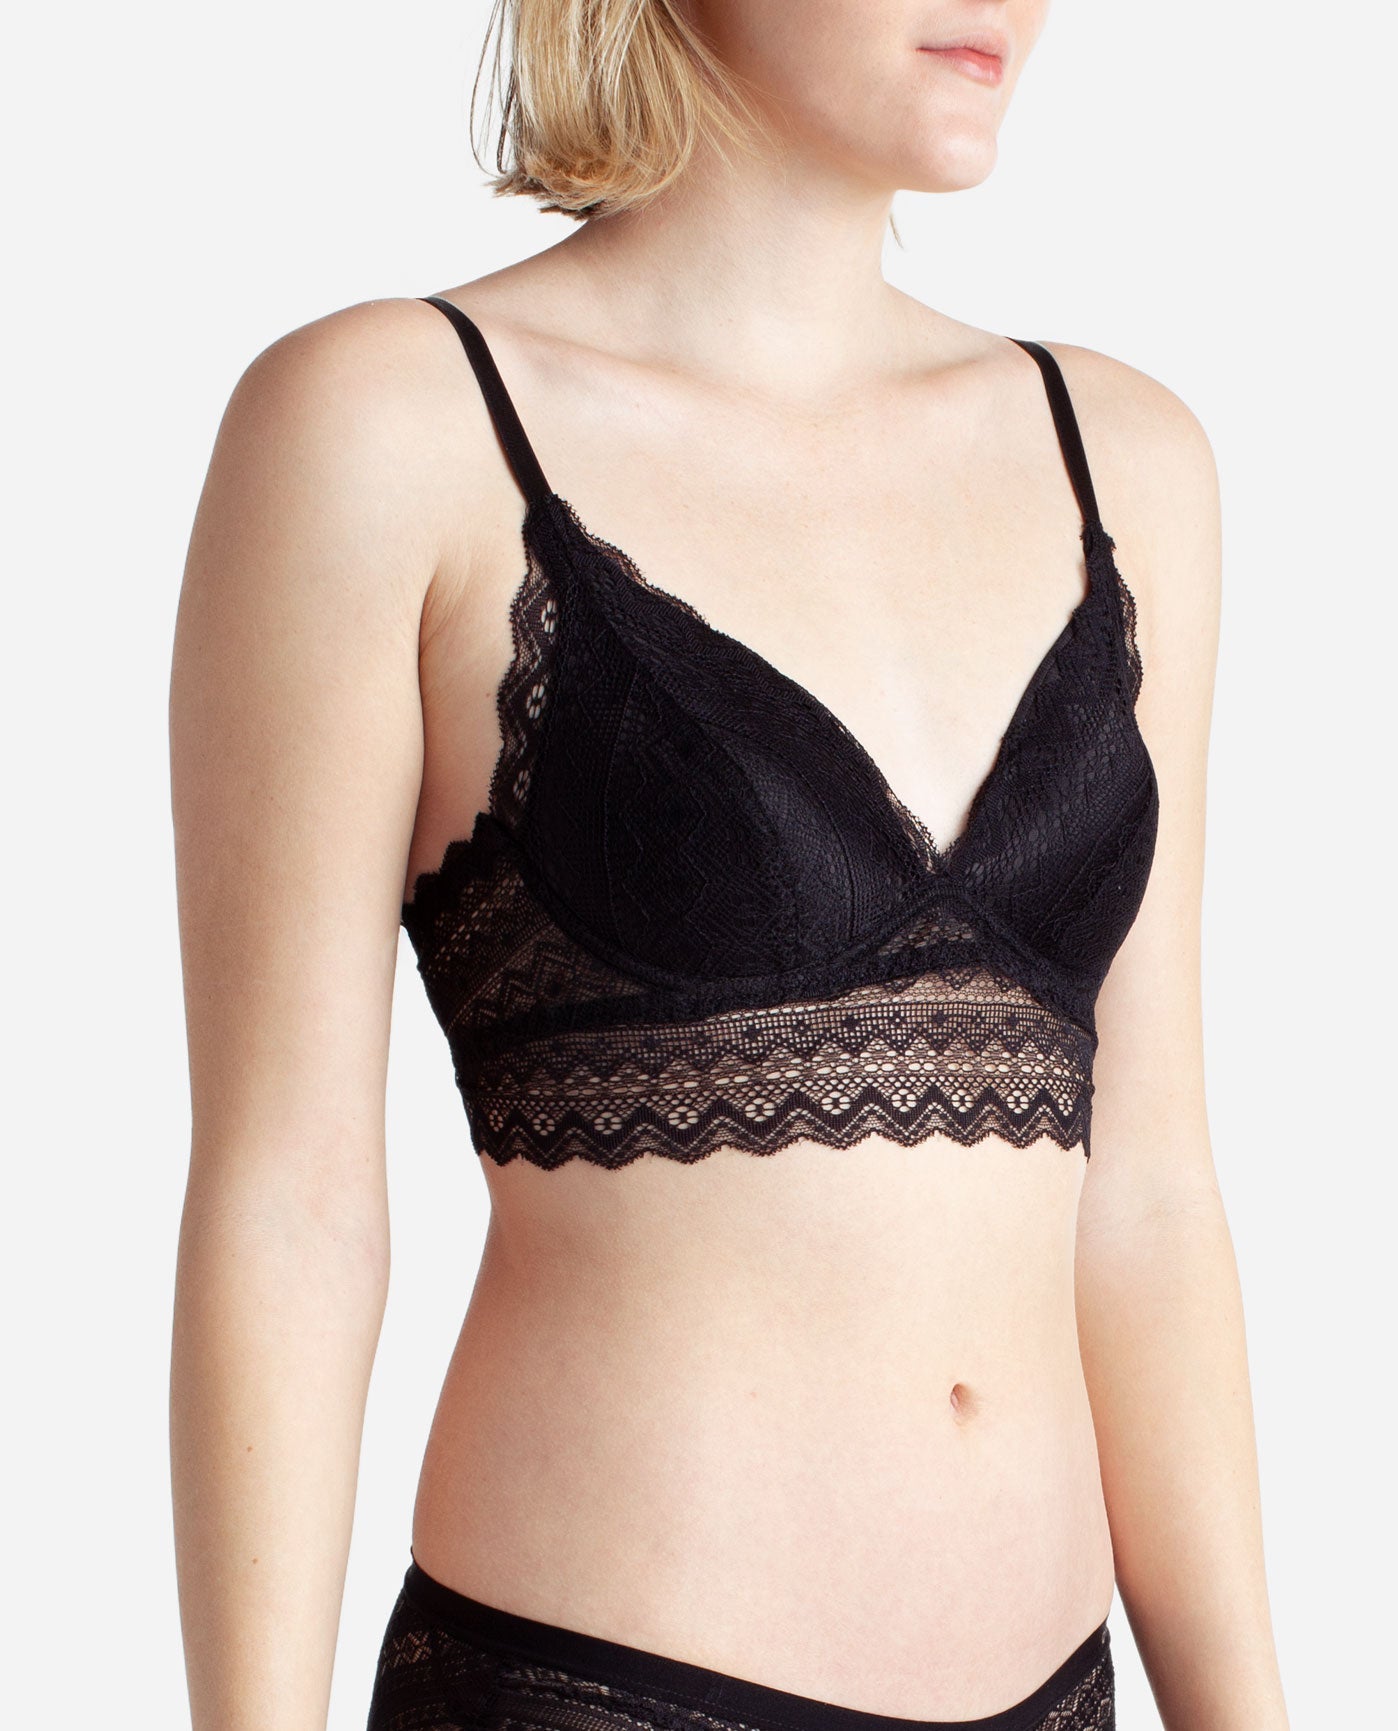 Danskin Intimates Brown Lace Lounge Bra for Sale in Rocky Point